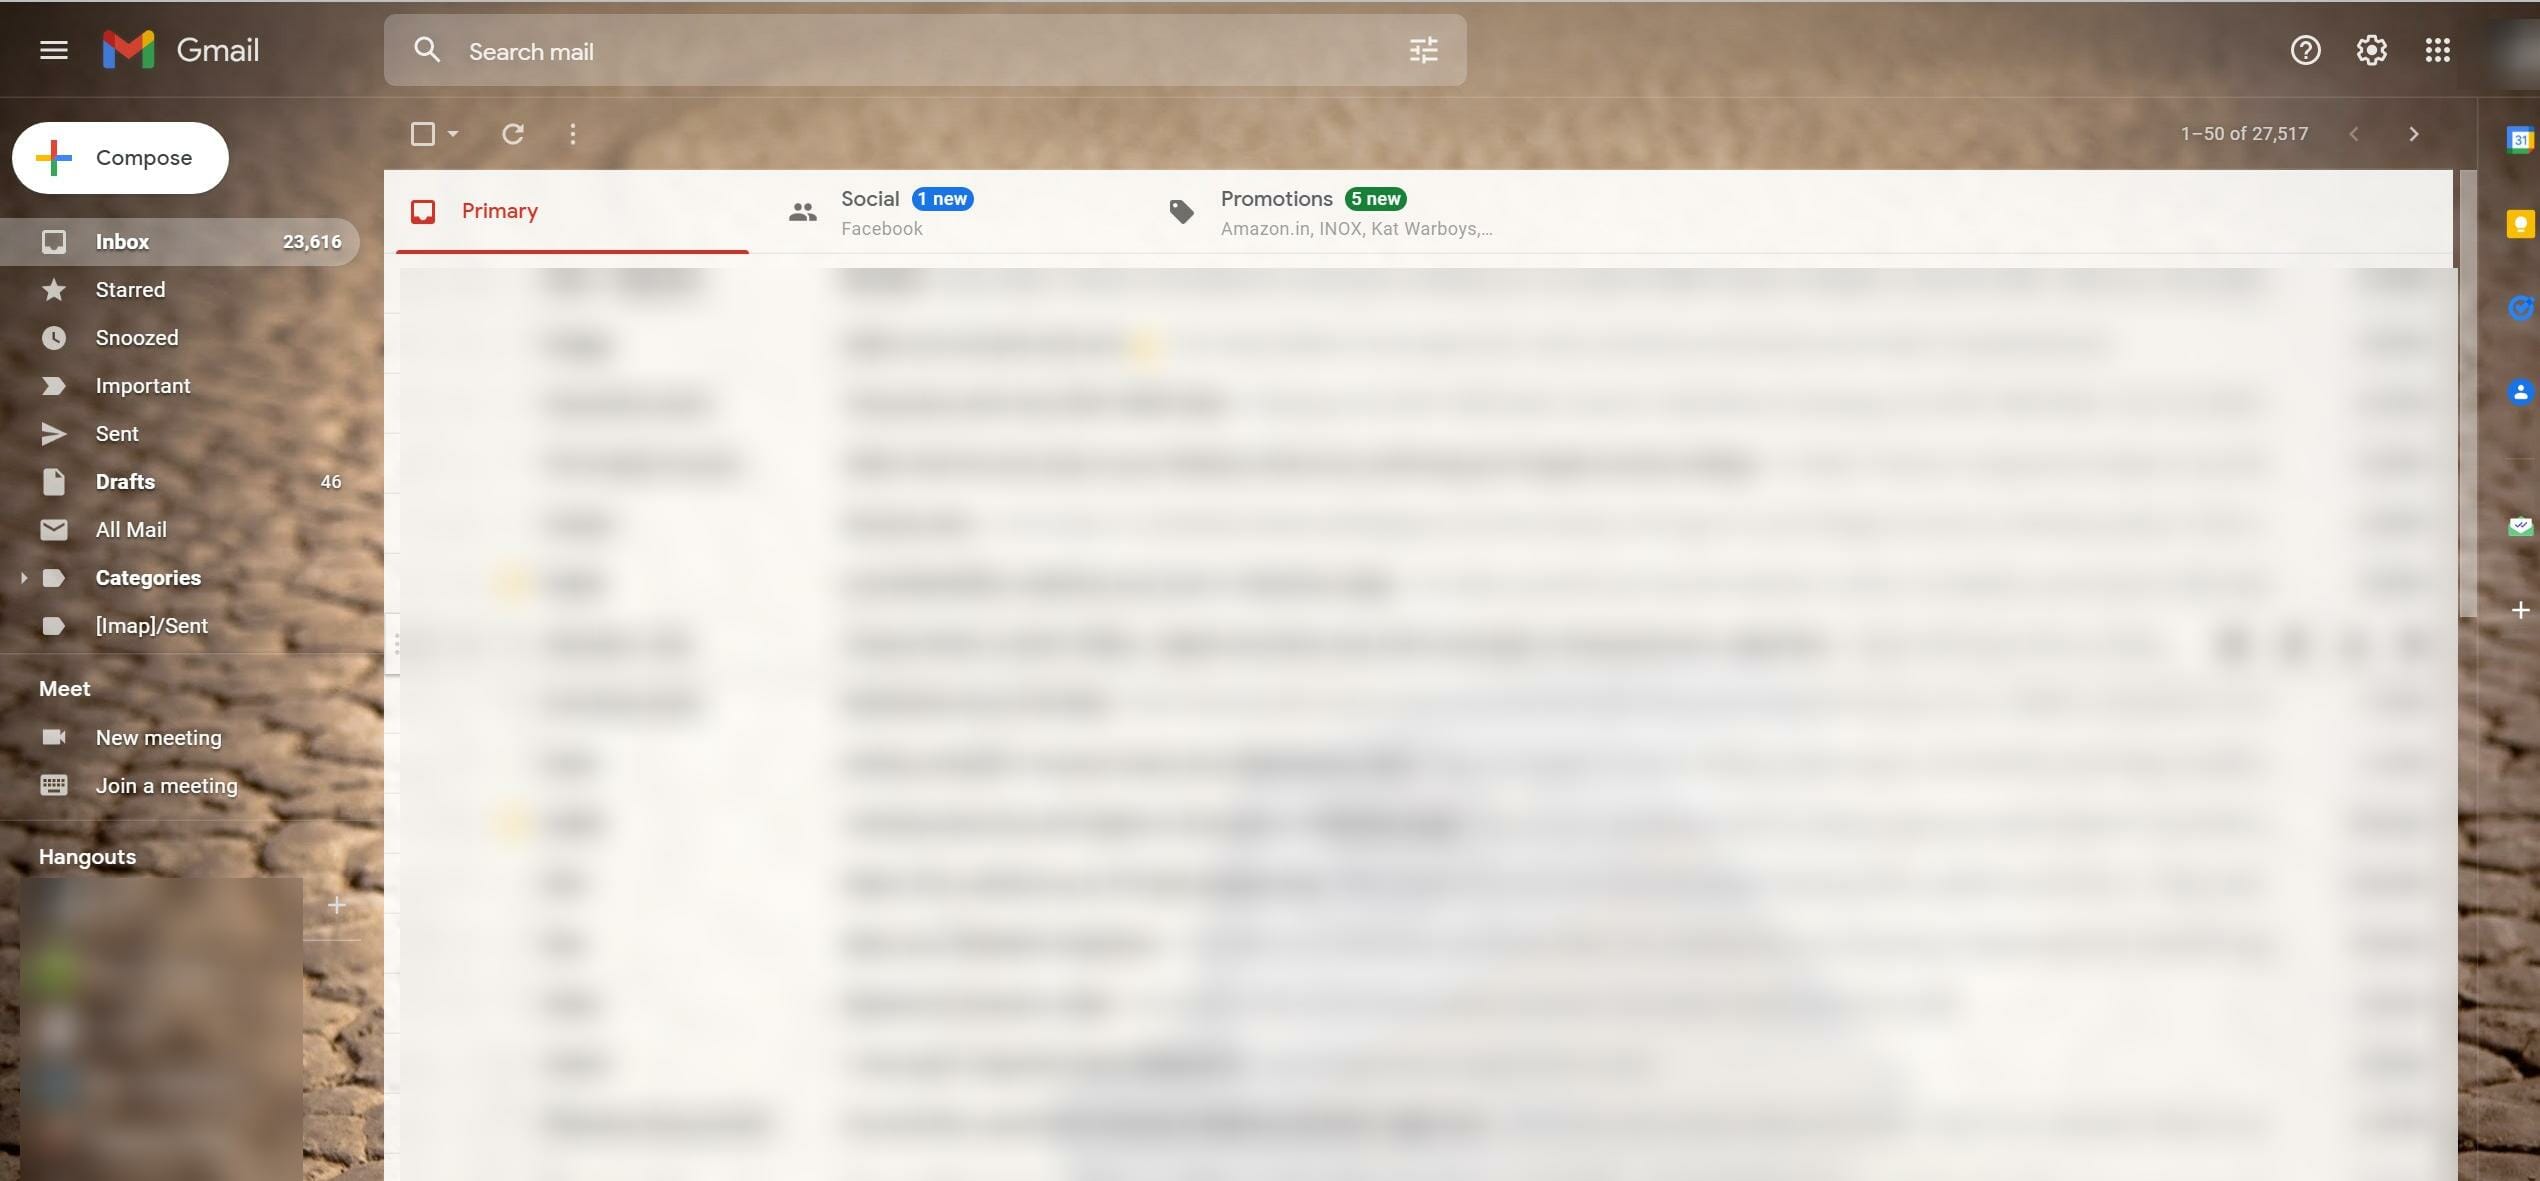 A look at Gmail's user interface